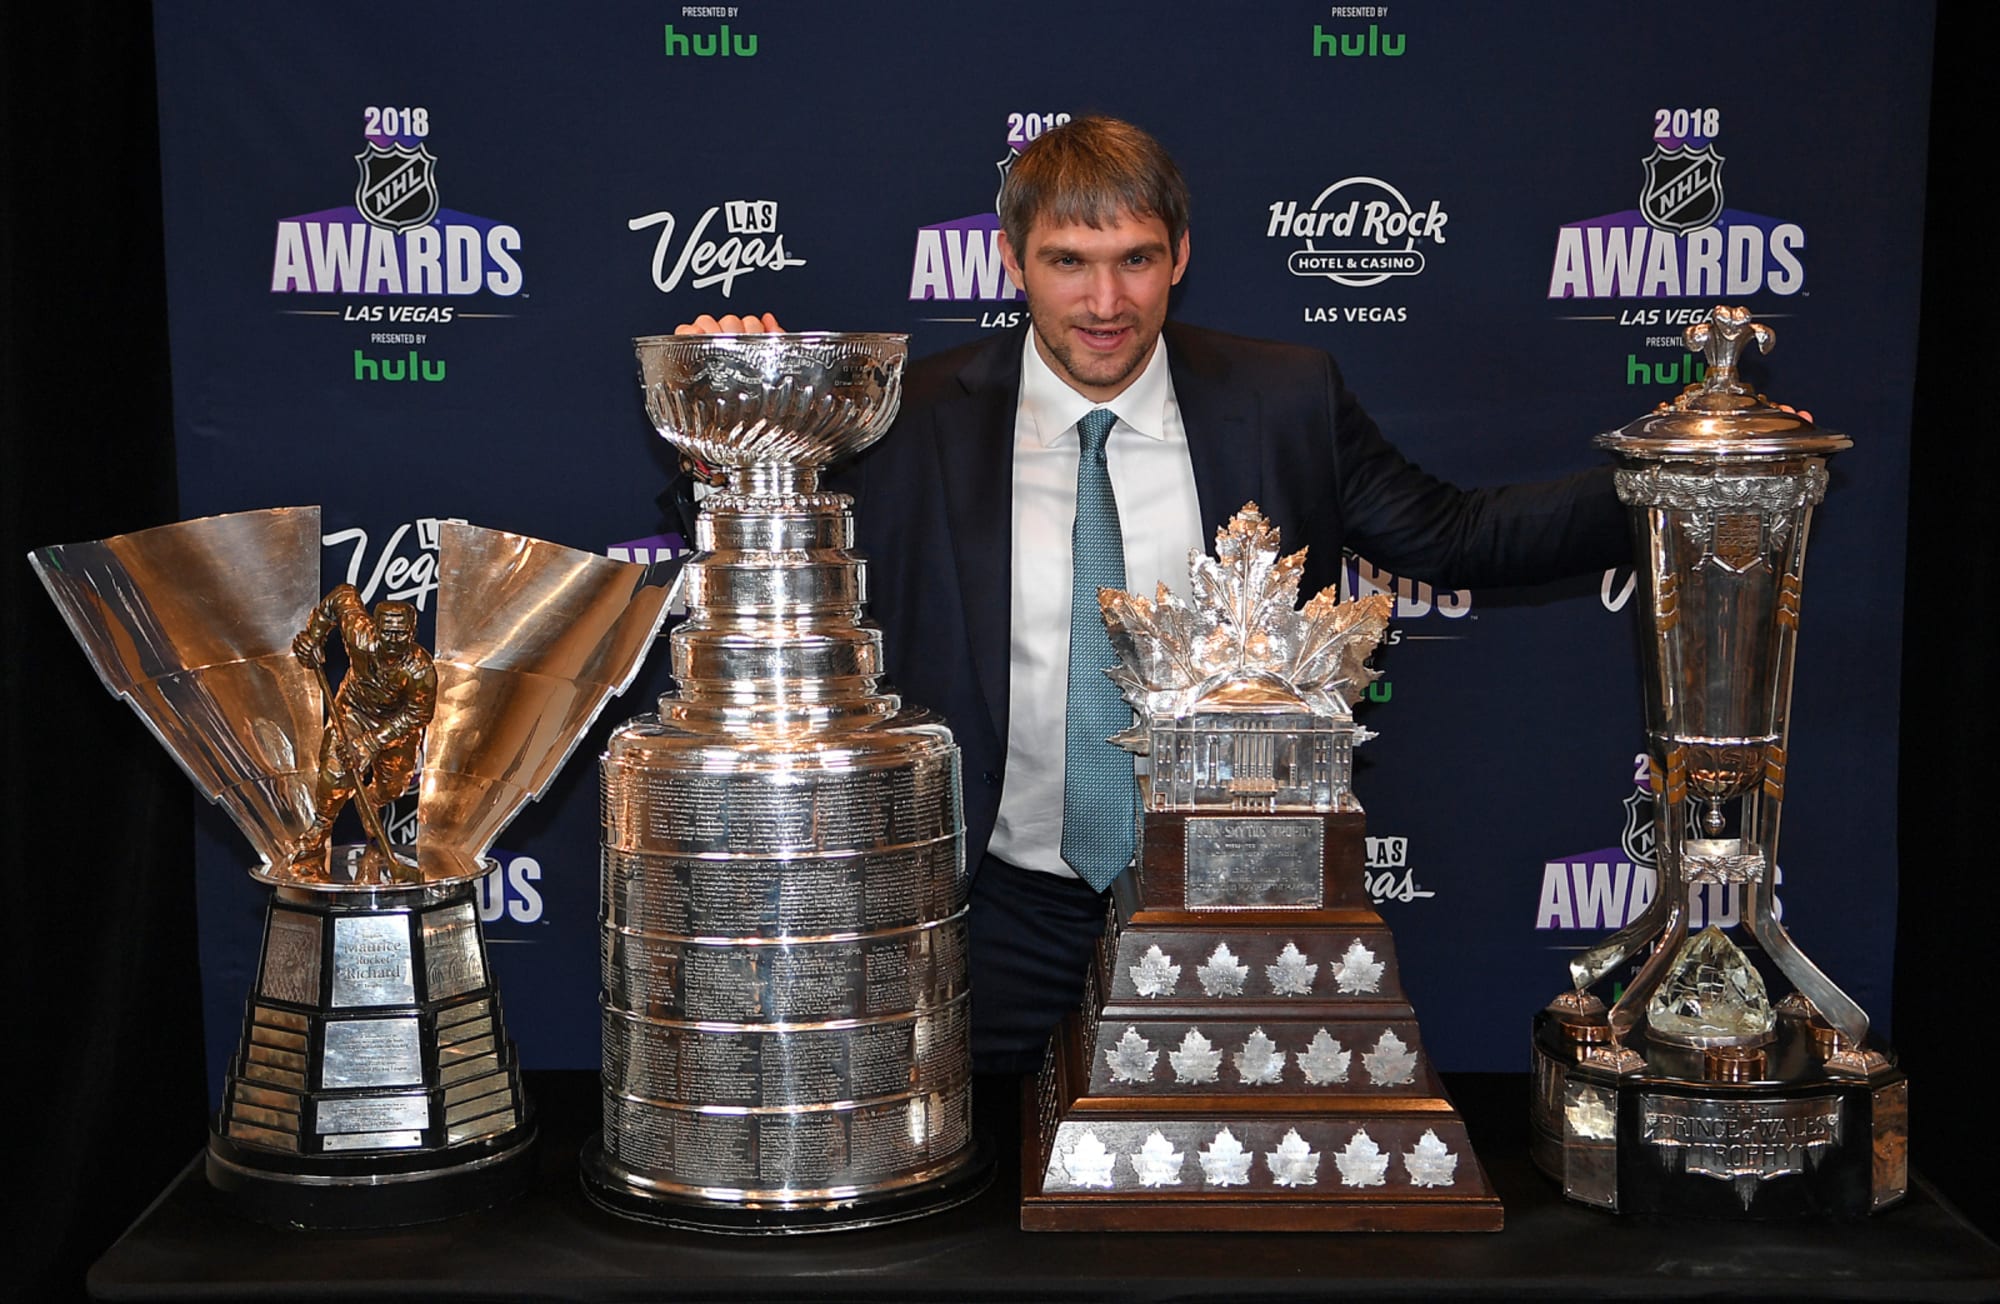 NHL won't hand out conference championship trophies this season